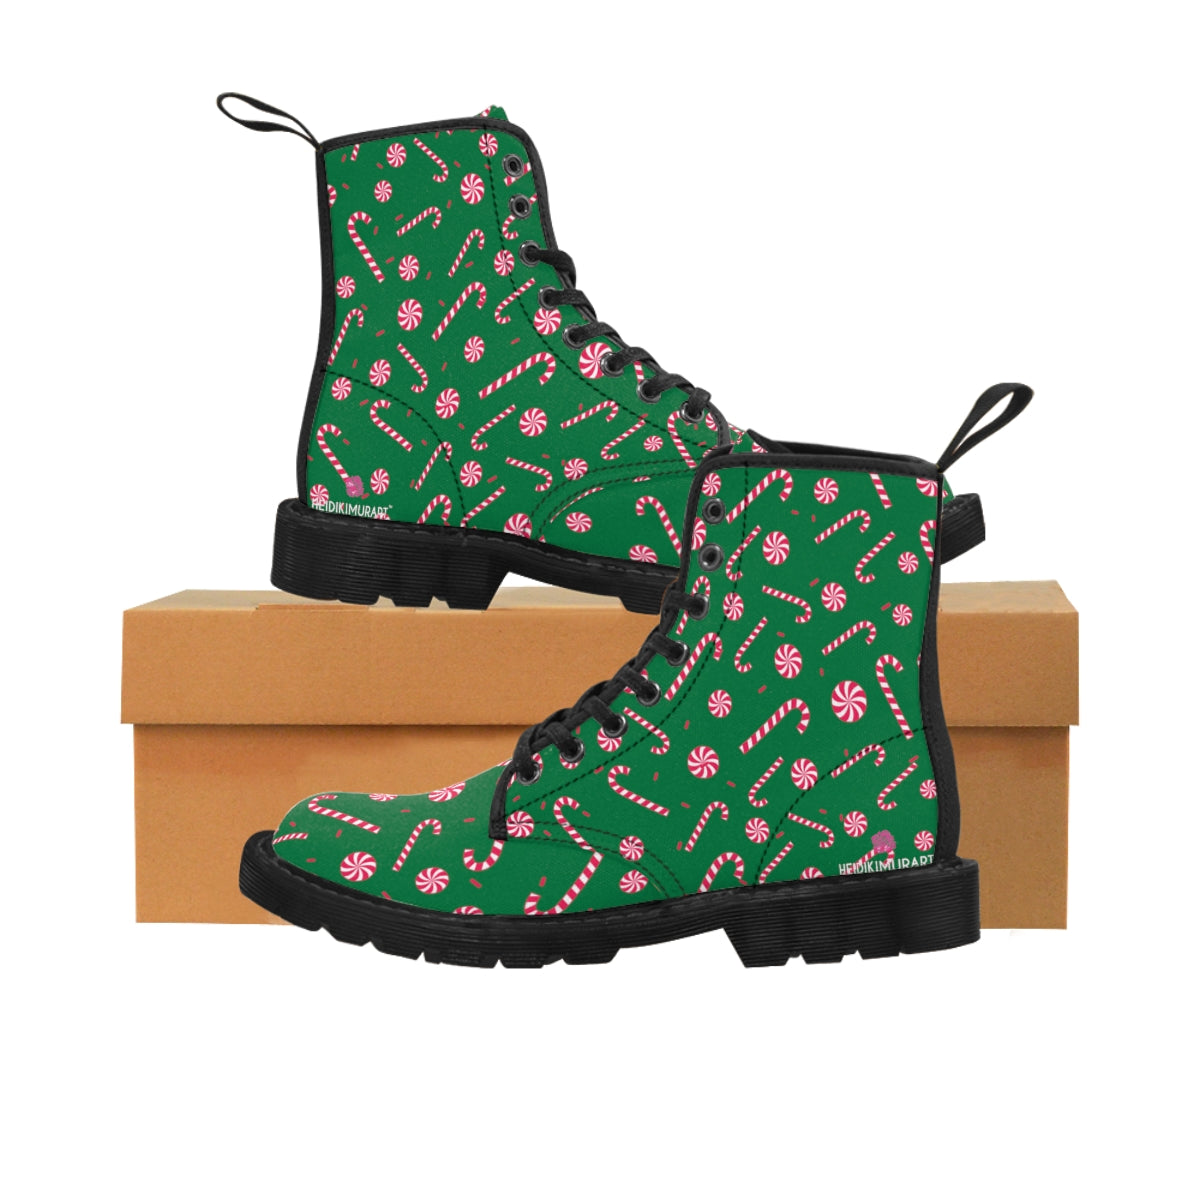 Green Christmas Women's Canvas Boots, Green Red Candy Cane Color Laced Up Winter Fashion Boots, Classic Christmas Festive Holiday Party Fun Designer Women's Winter Lace-up Toe Cap Ankle Hiking Boots (US Size 6.5-11) Casual Fashion Winter Boots For Ladies